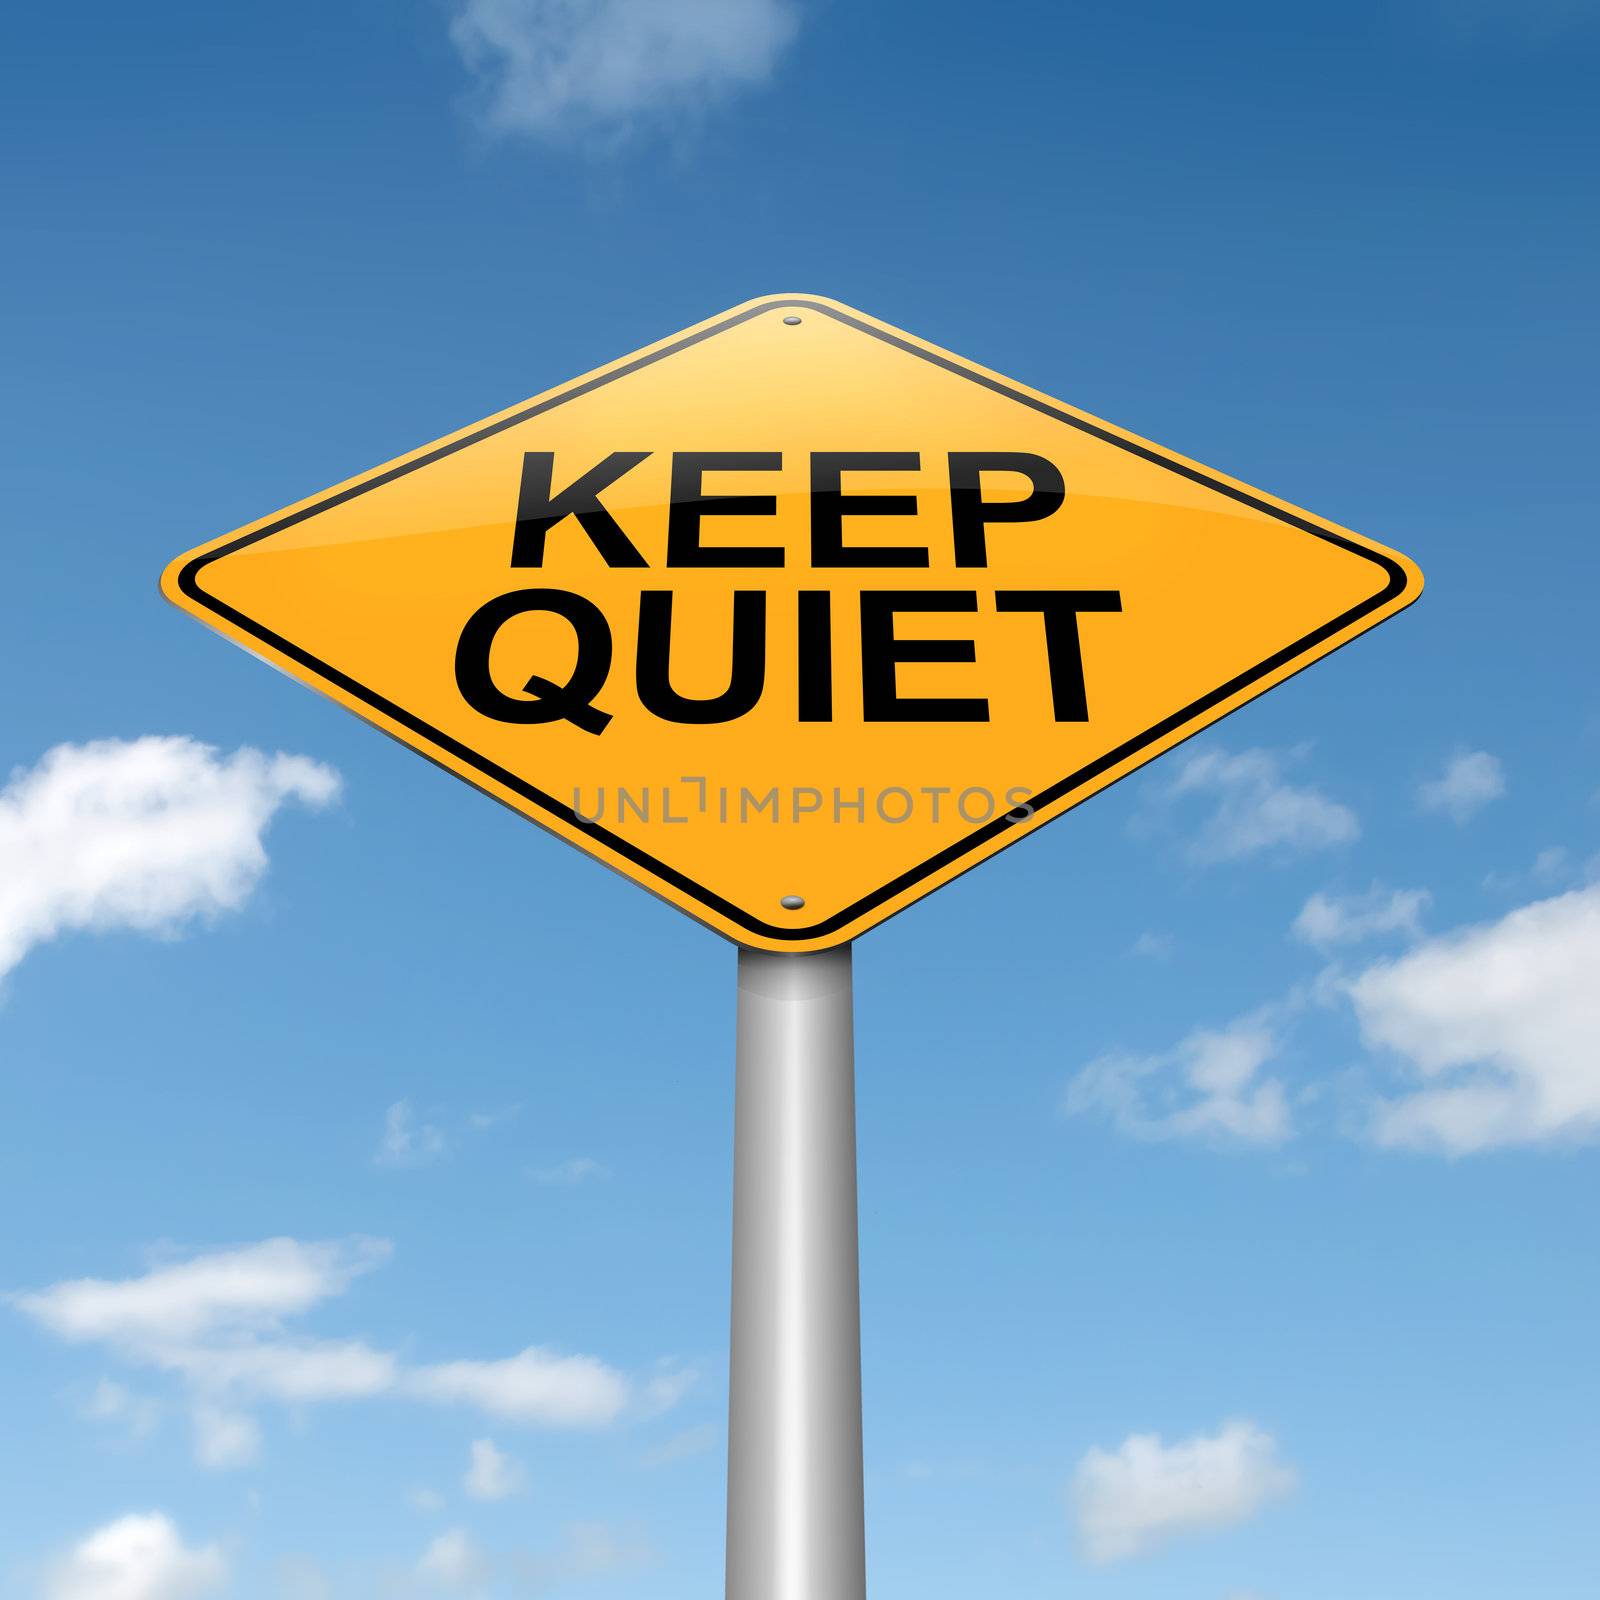 Illustration depicting a roadsign with a keep quiet concept. Sky background.